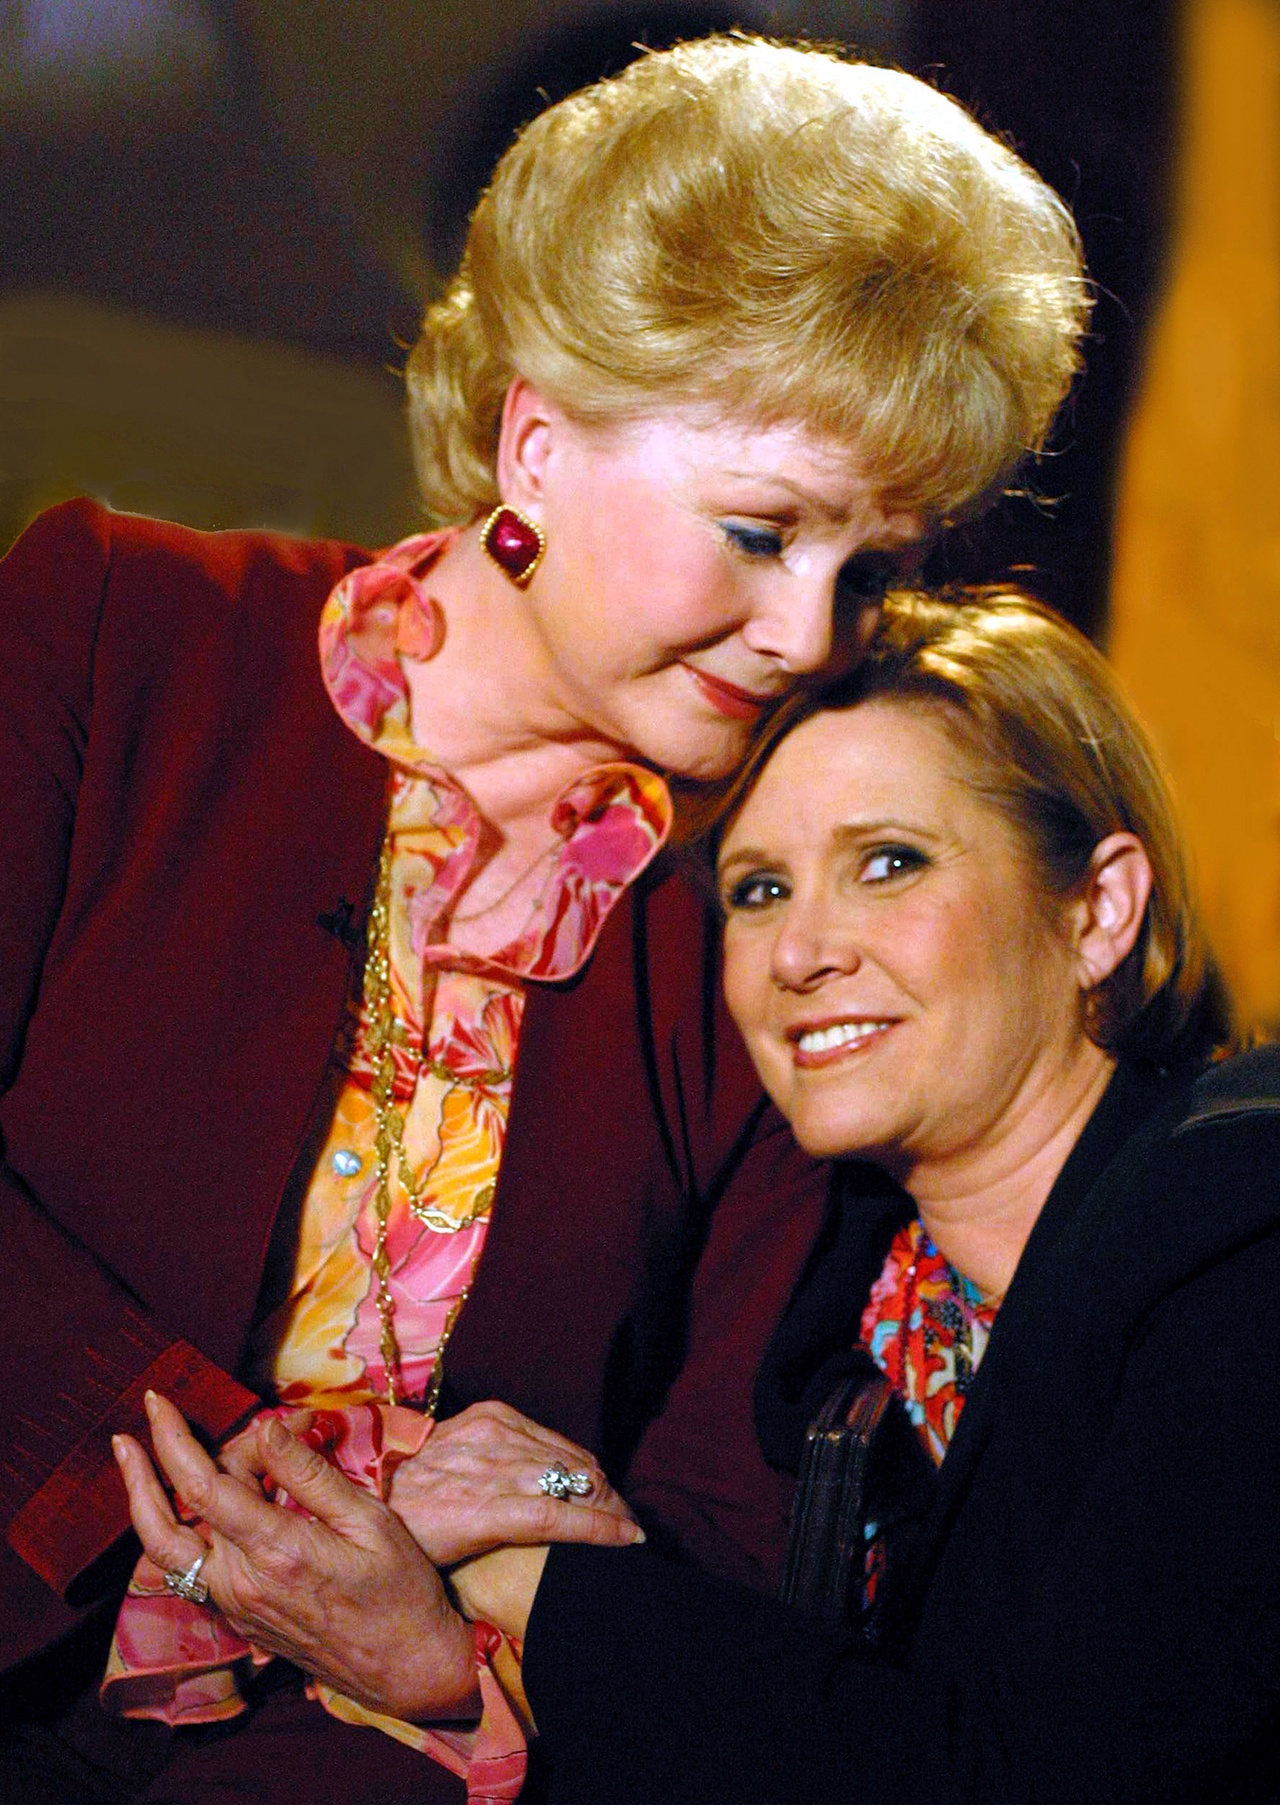 Debbie Reynolds (left) and her daughter, Carrie Fisher.